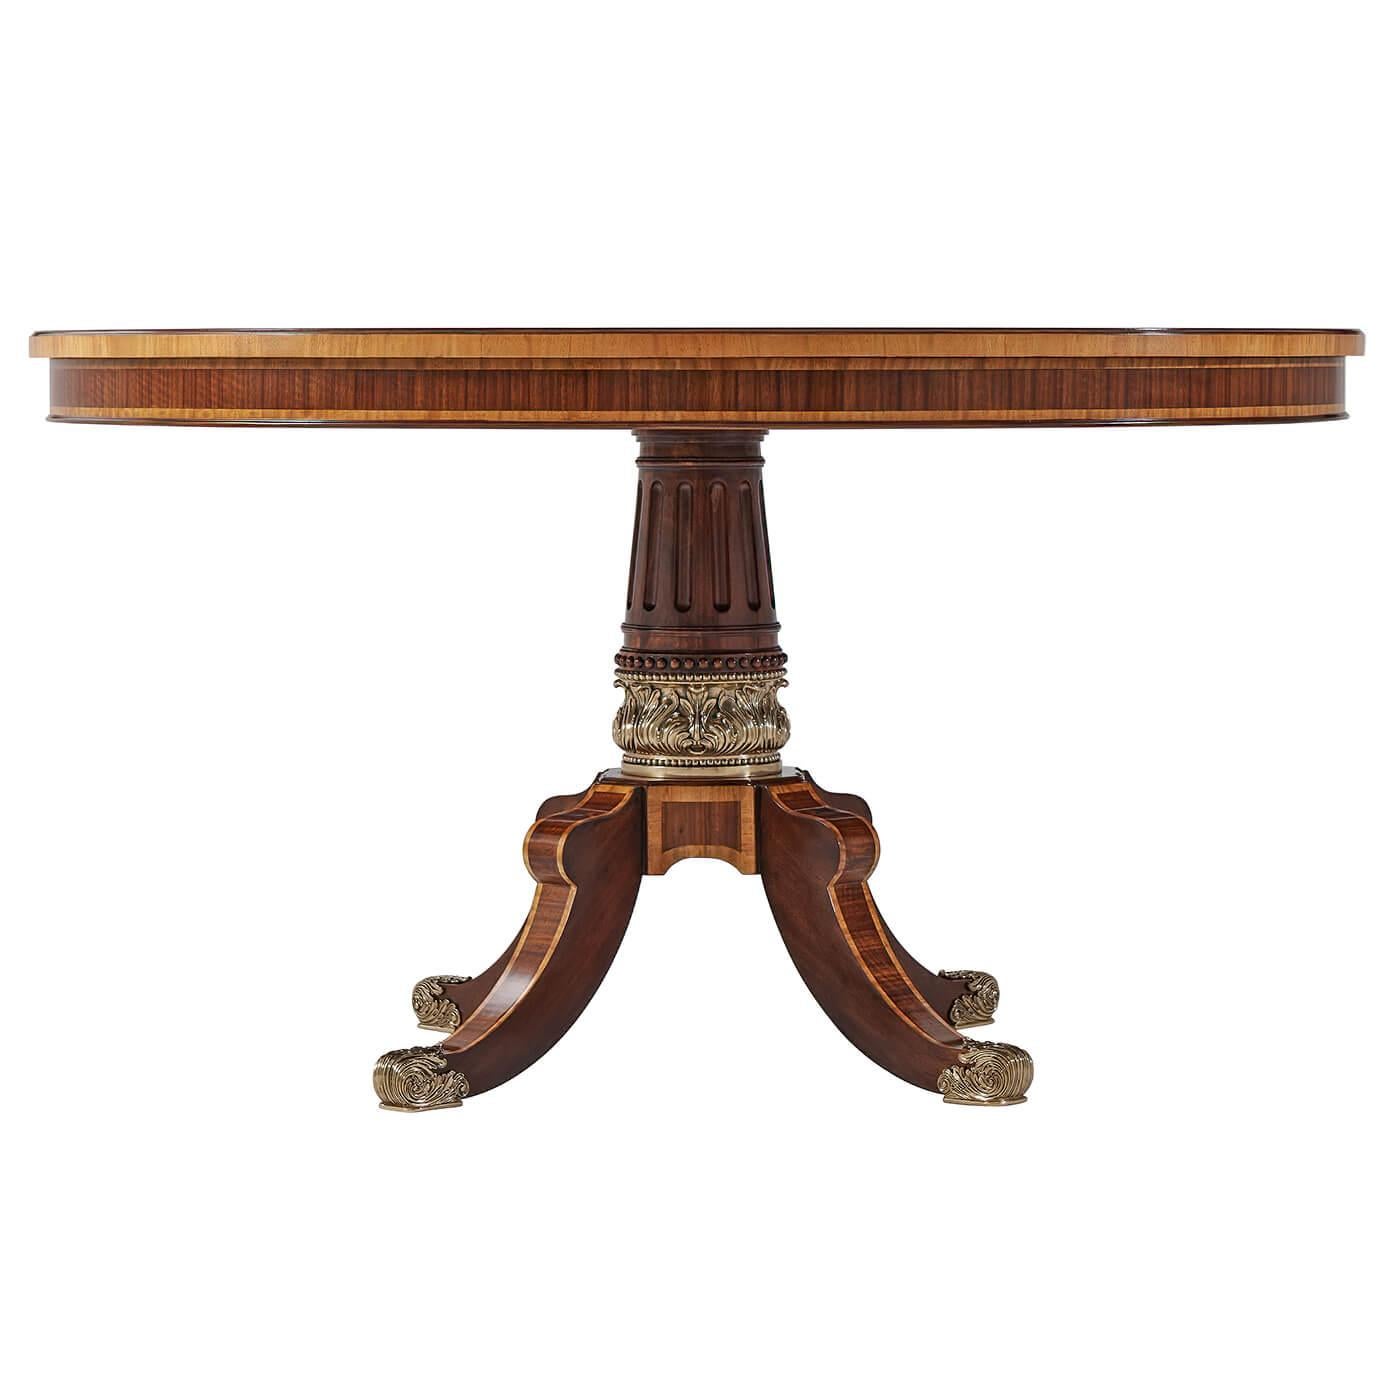 Regency style brass inlaid and crossbanded round dining table with a carved acanthus pedestal base having cast brass accents.

Dimensions: 53.25